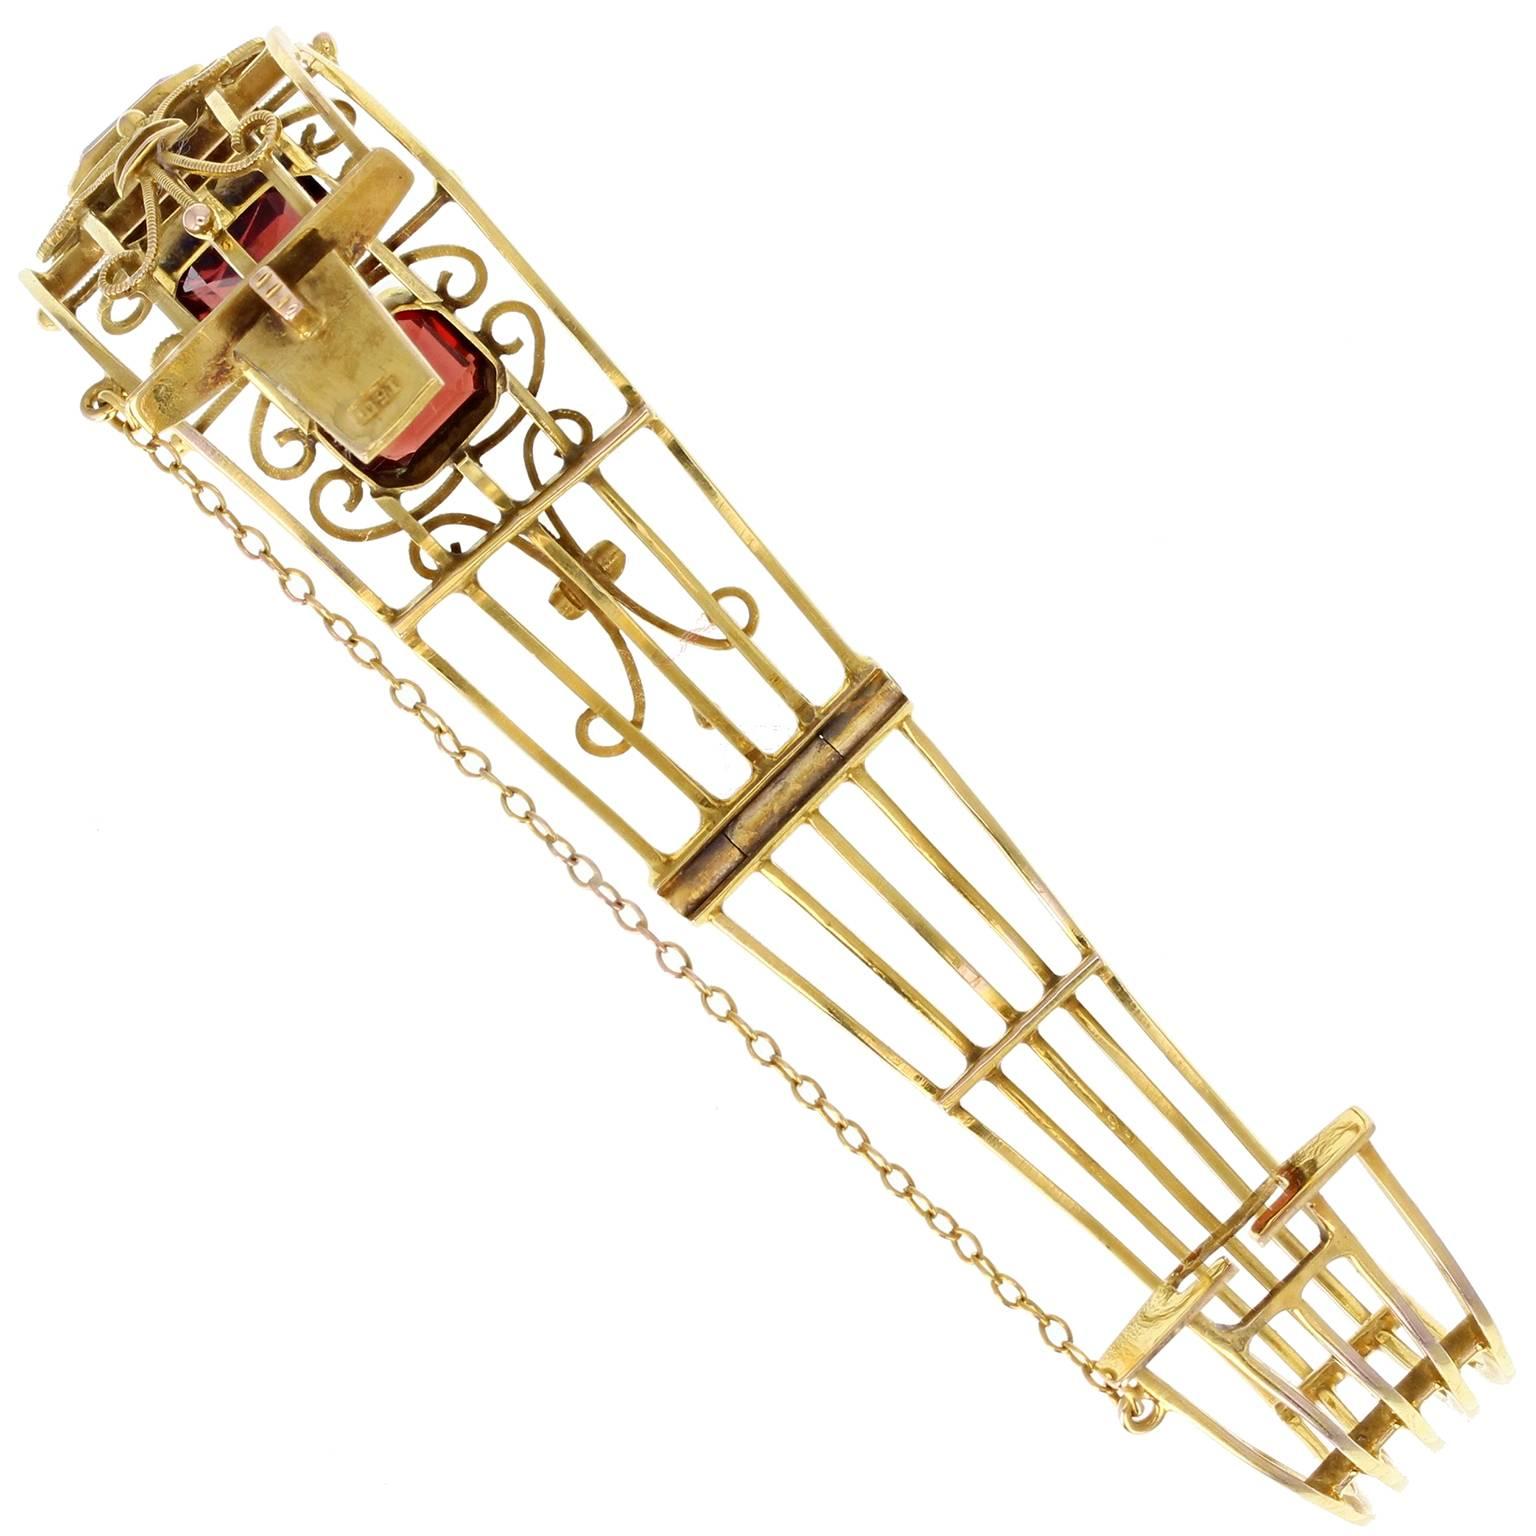 A fine quality Victorian openwork 15 carat gold bangle, set with three emerald-cut garnets. Applied wire scroll detailing. Hinged, with tongue-type clasp and safety chain. Stamped 15ct. 
Setting
Tests as 15ct gold

Diameter (wrist size)
60mm
